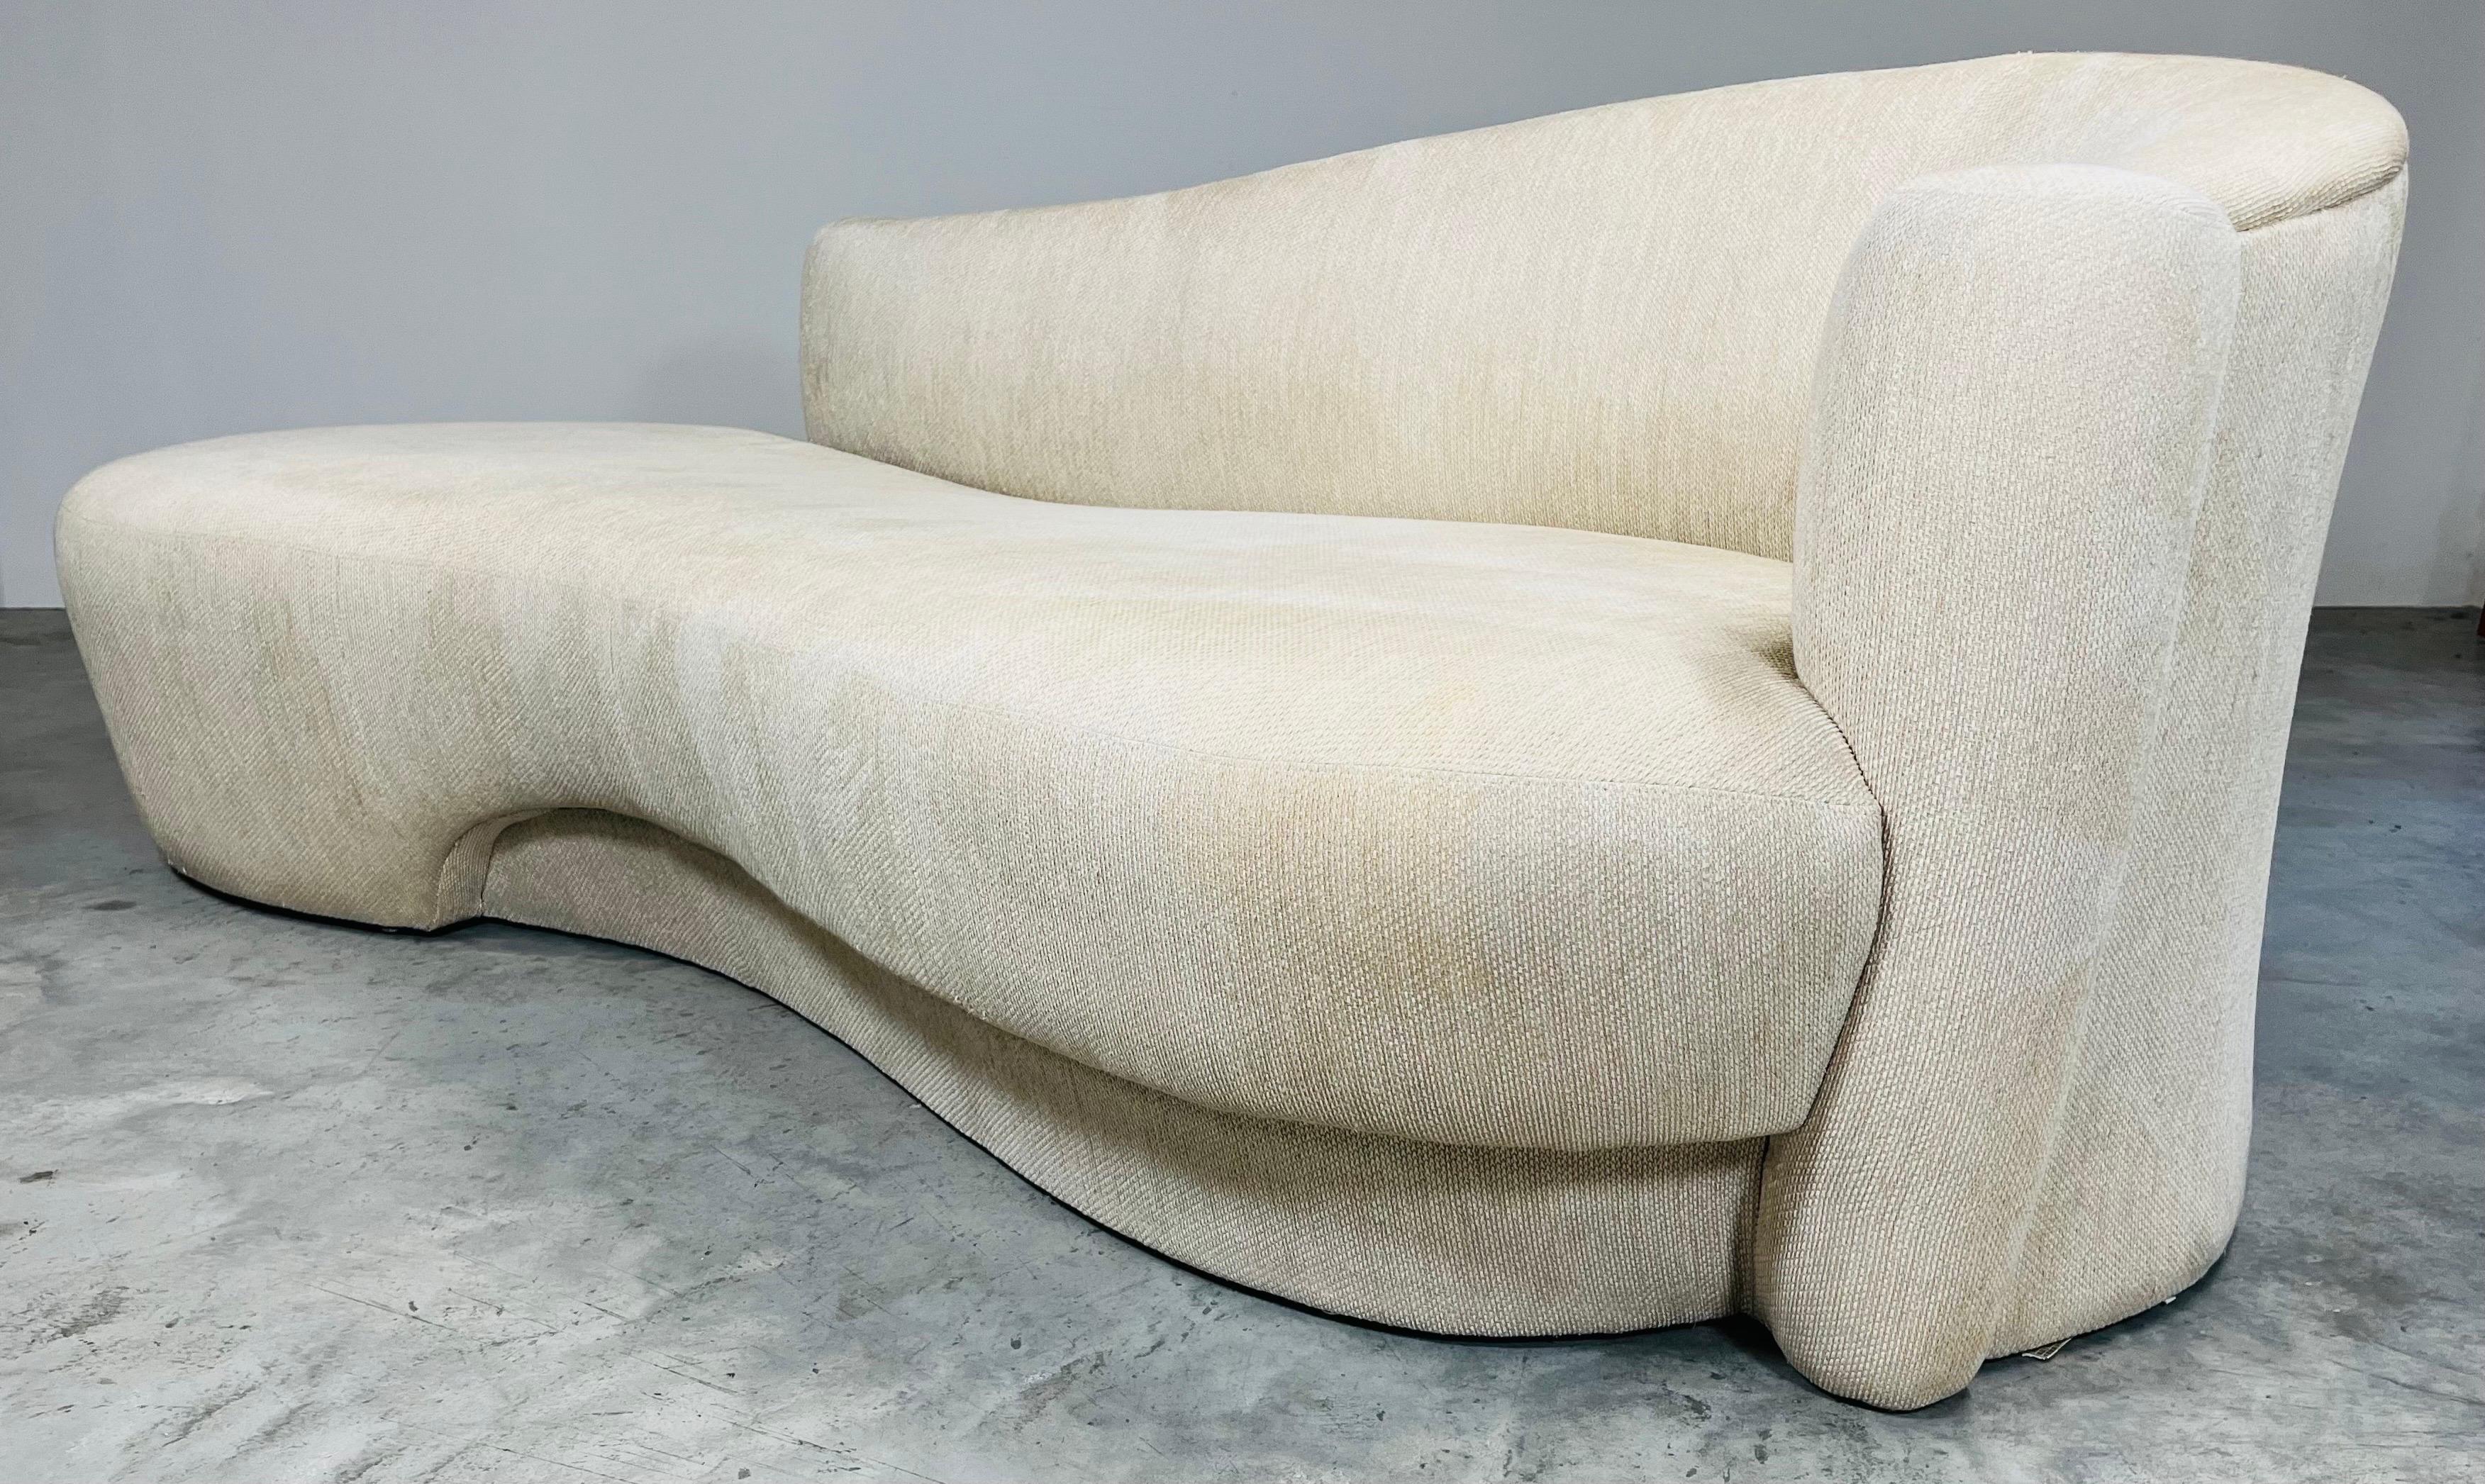 Post-Modern Weiman Post Modern Cloud Sofa Chaise Lounge c. 1990 (Fabric Stain)  For Sale